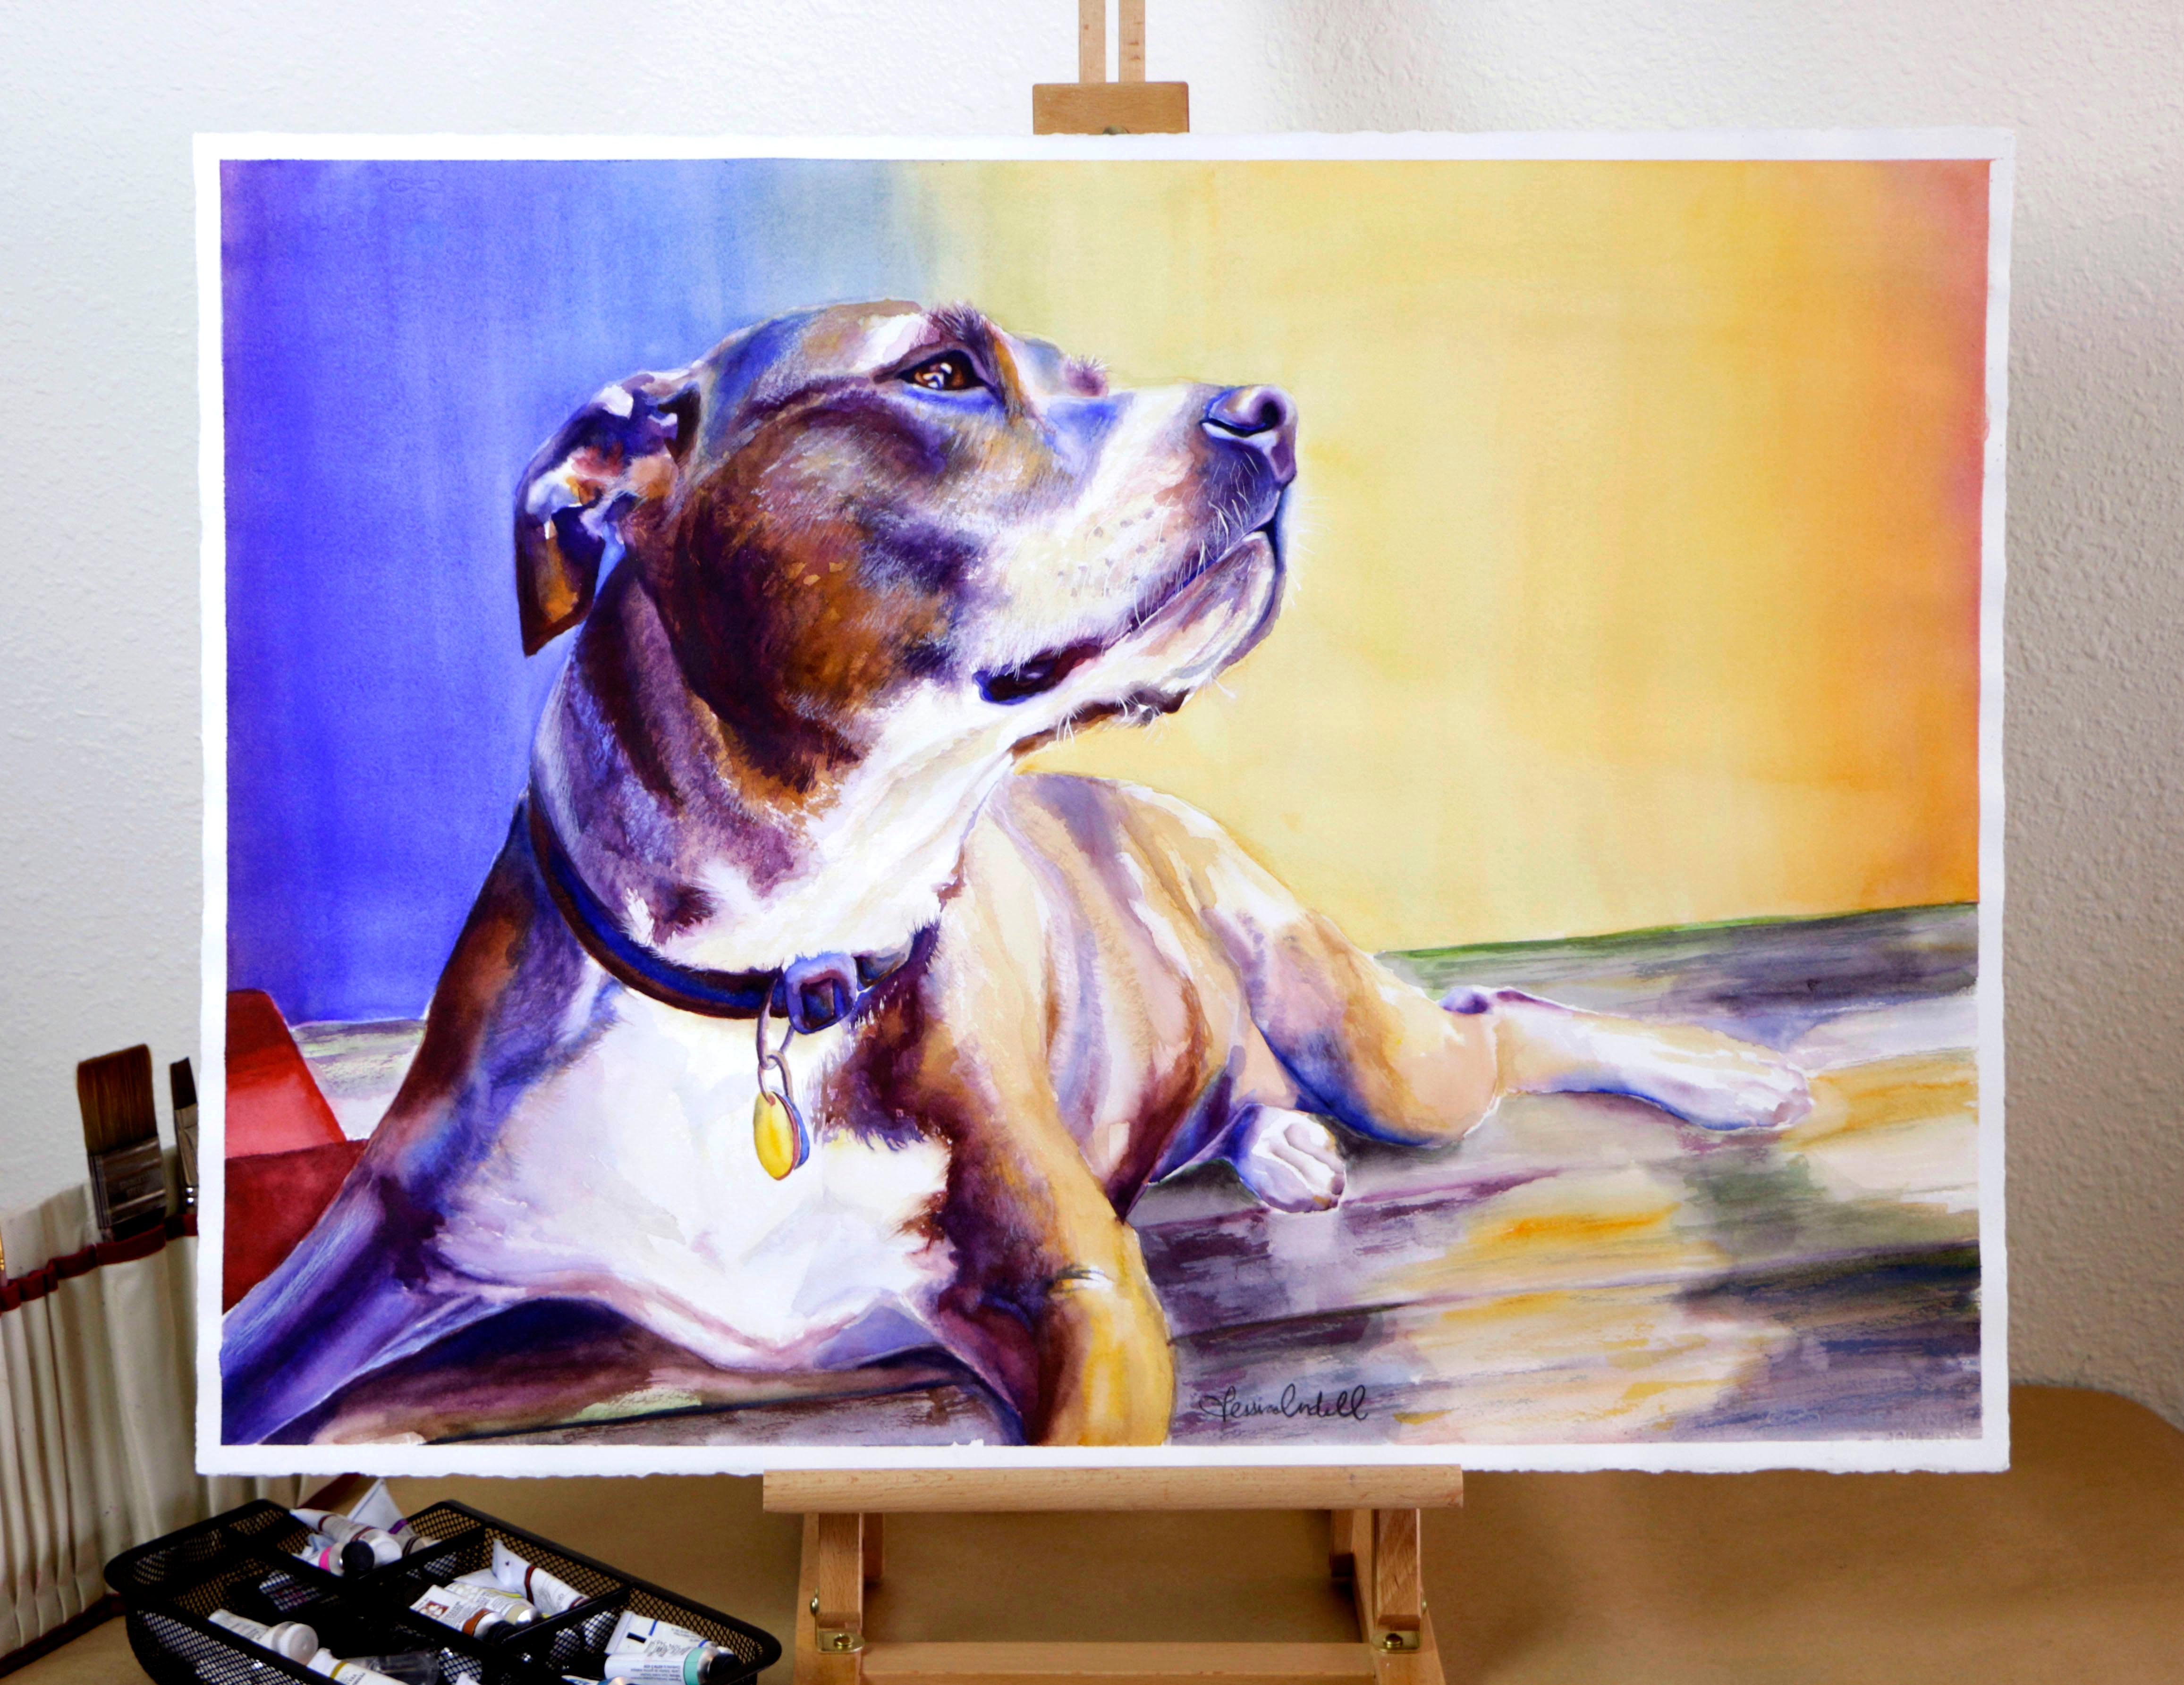 <p>Artist Comments<br> Delia is basking in the sun. In this painting, I aimed to capture her state of bliss by accurately depicting her facial features (especially her ear) and using warm colors that depict a humid summer day.  This painting has